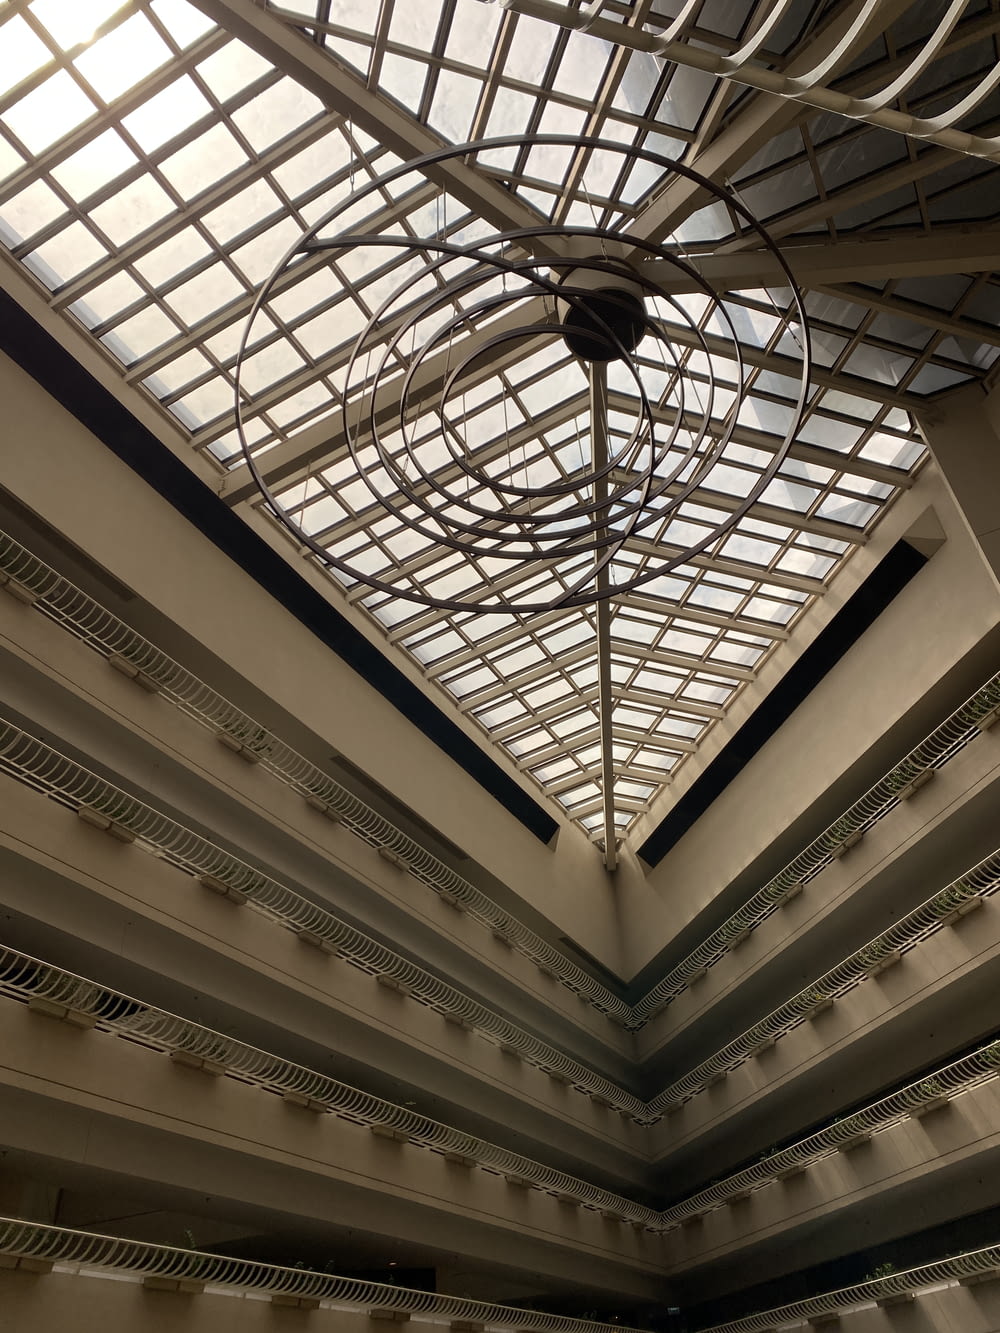 the ceiling of a building with a glass roof